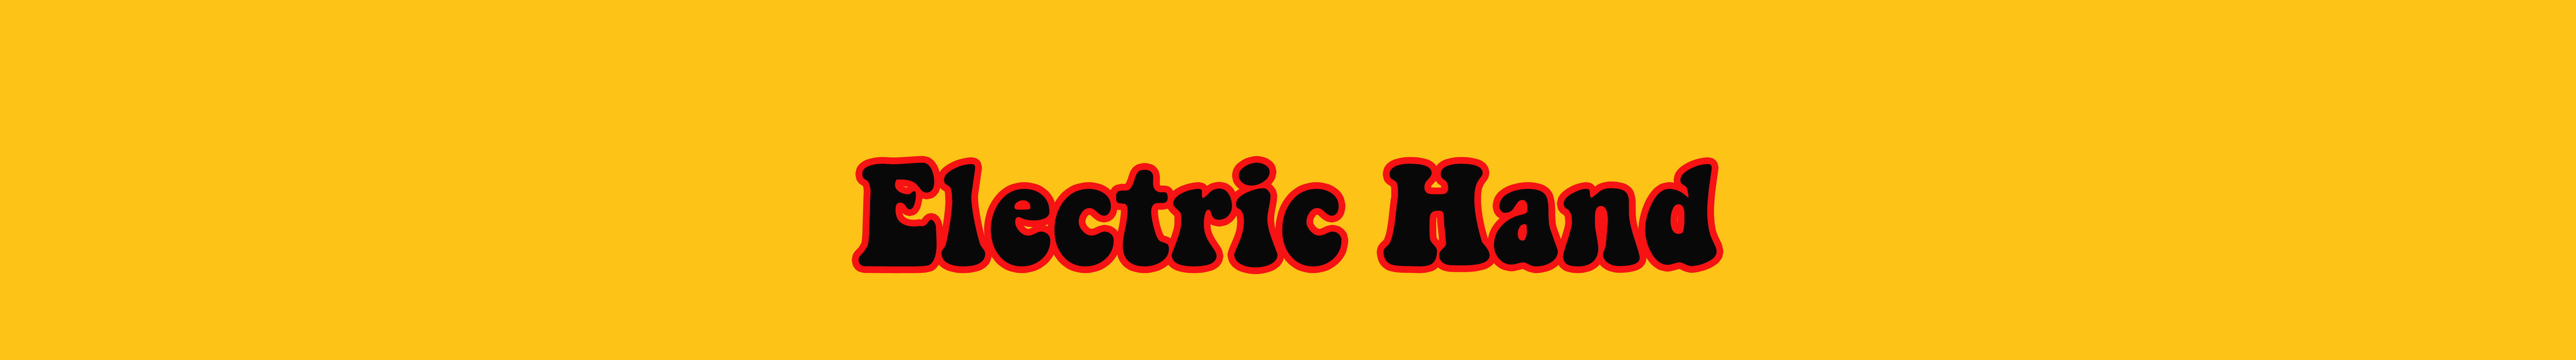 Electric Hand's profile banner